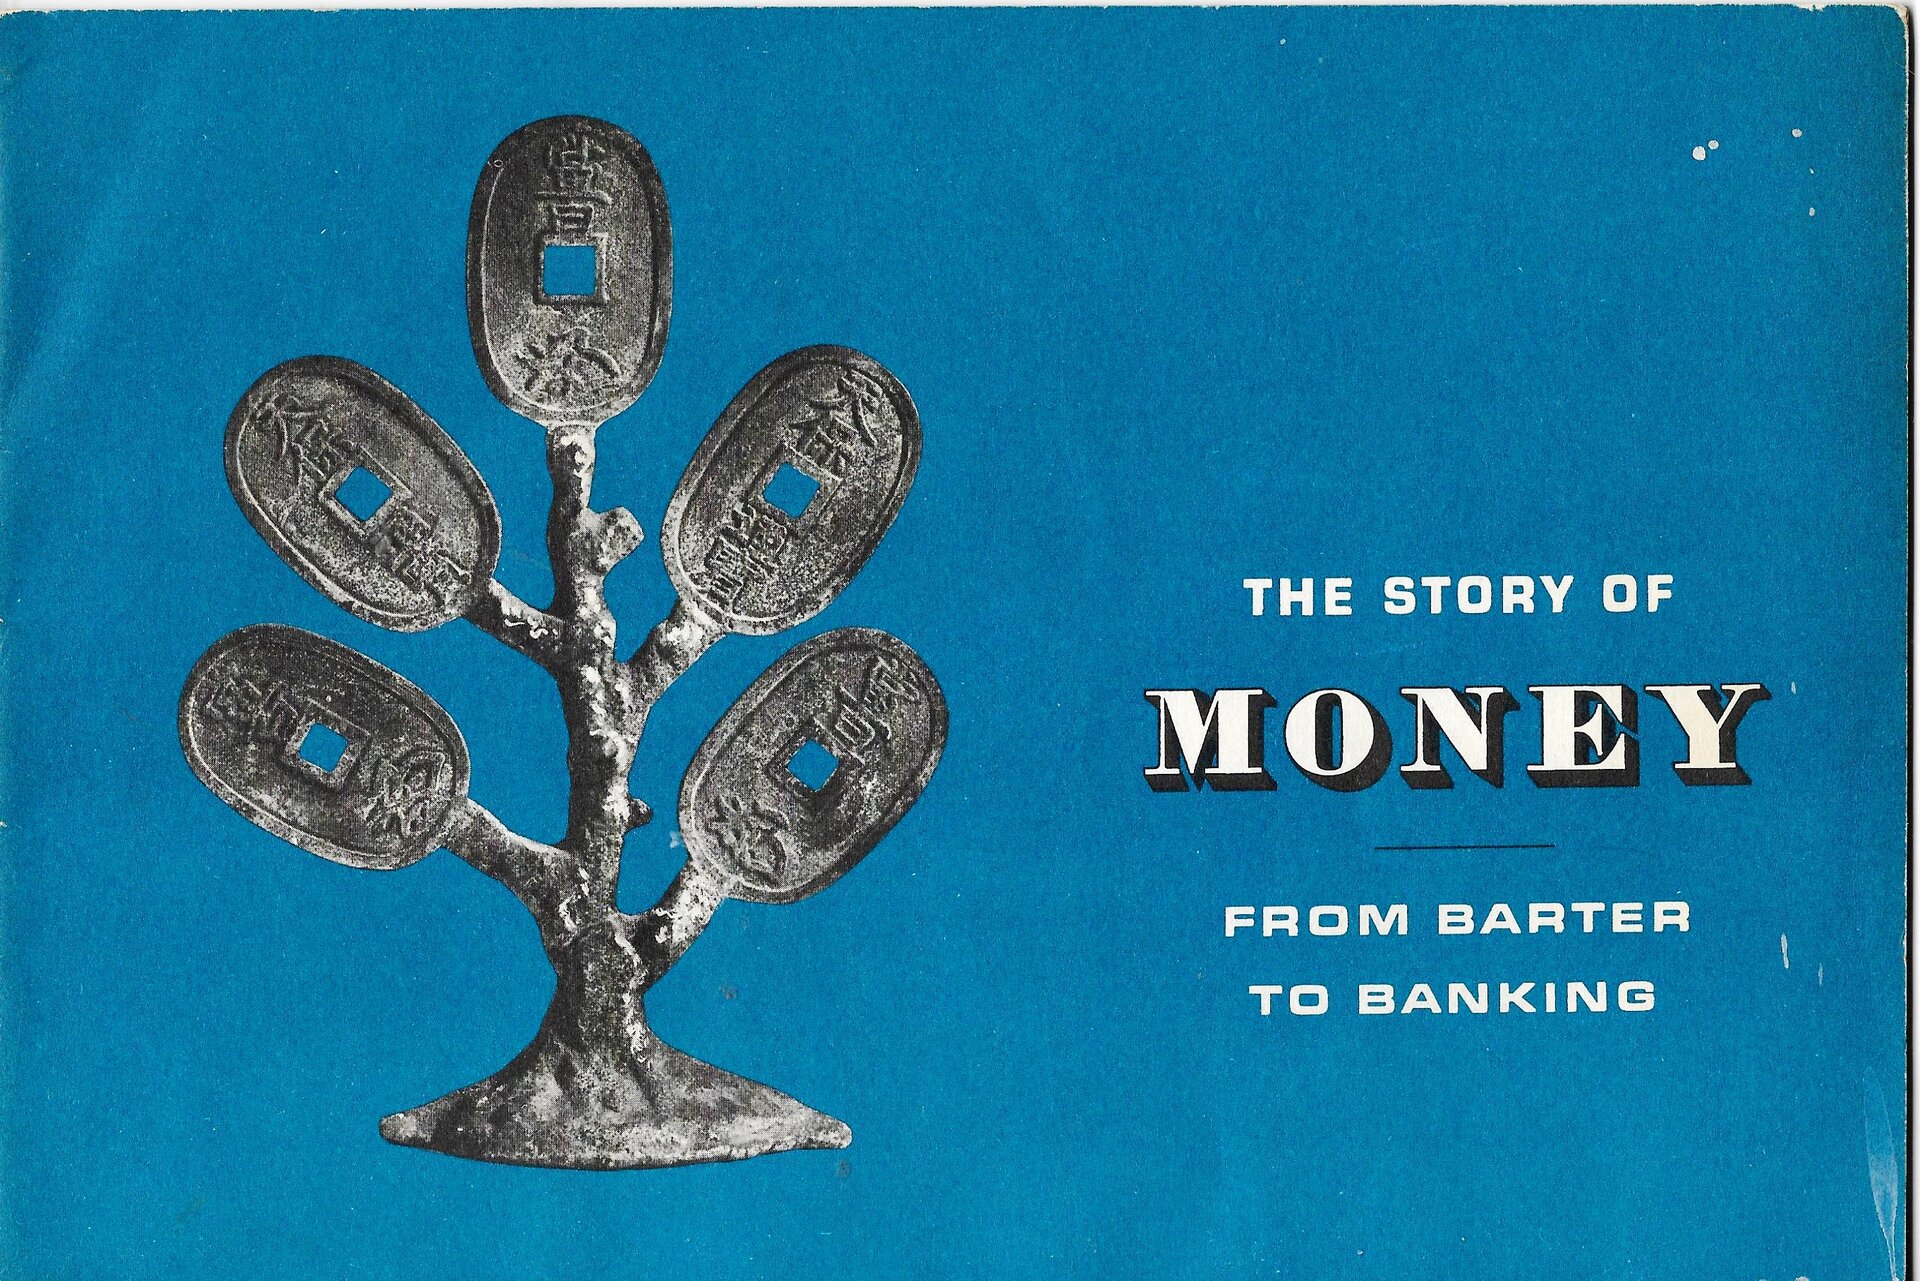 Chase Bank Money Museum booklet 1962 front cover.jpg